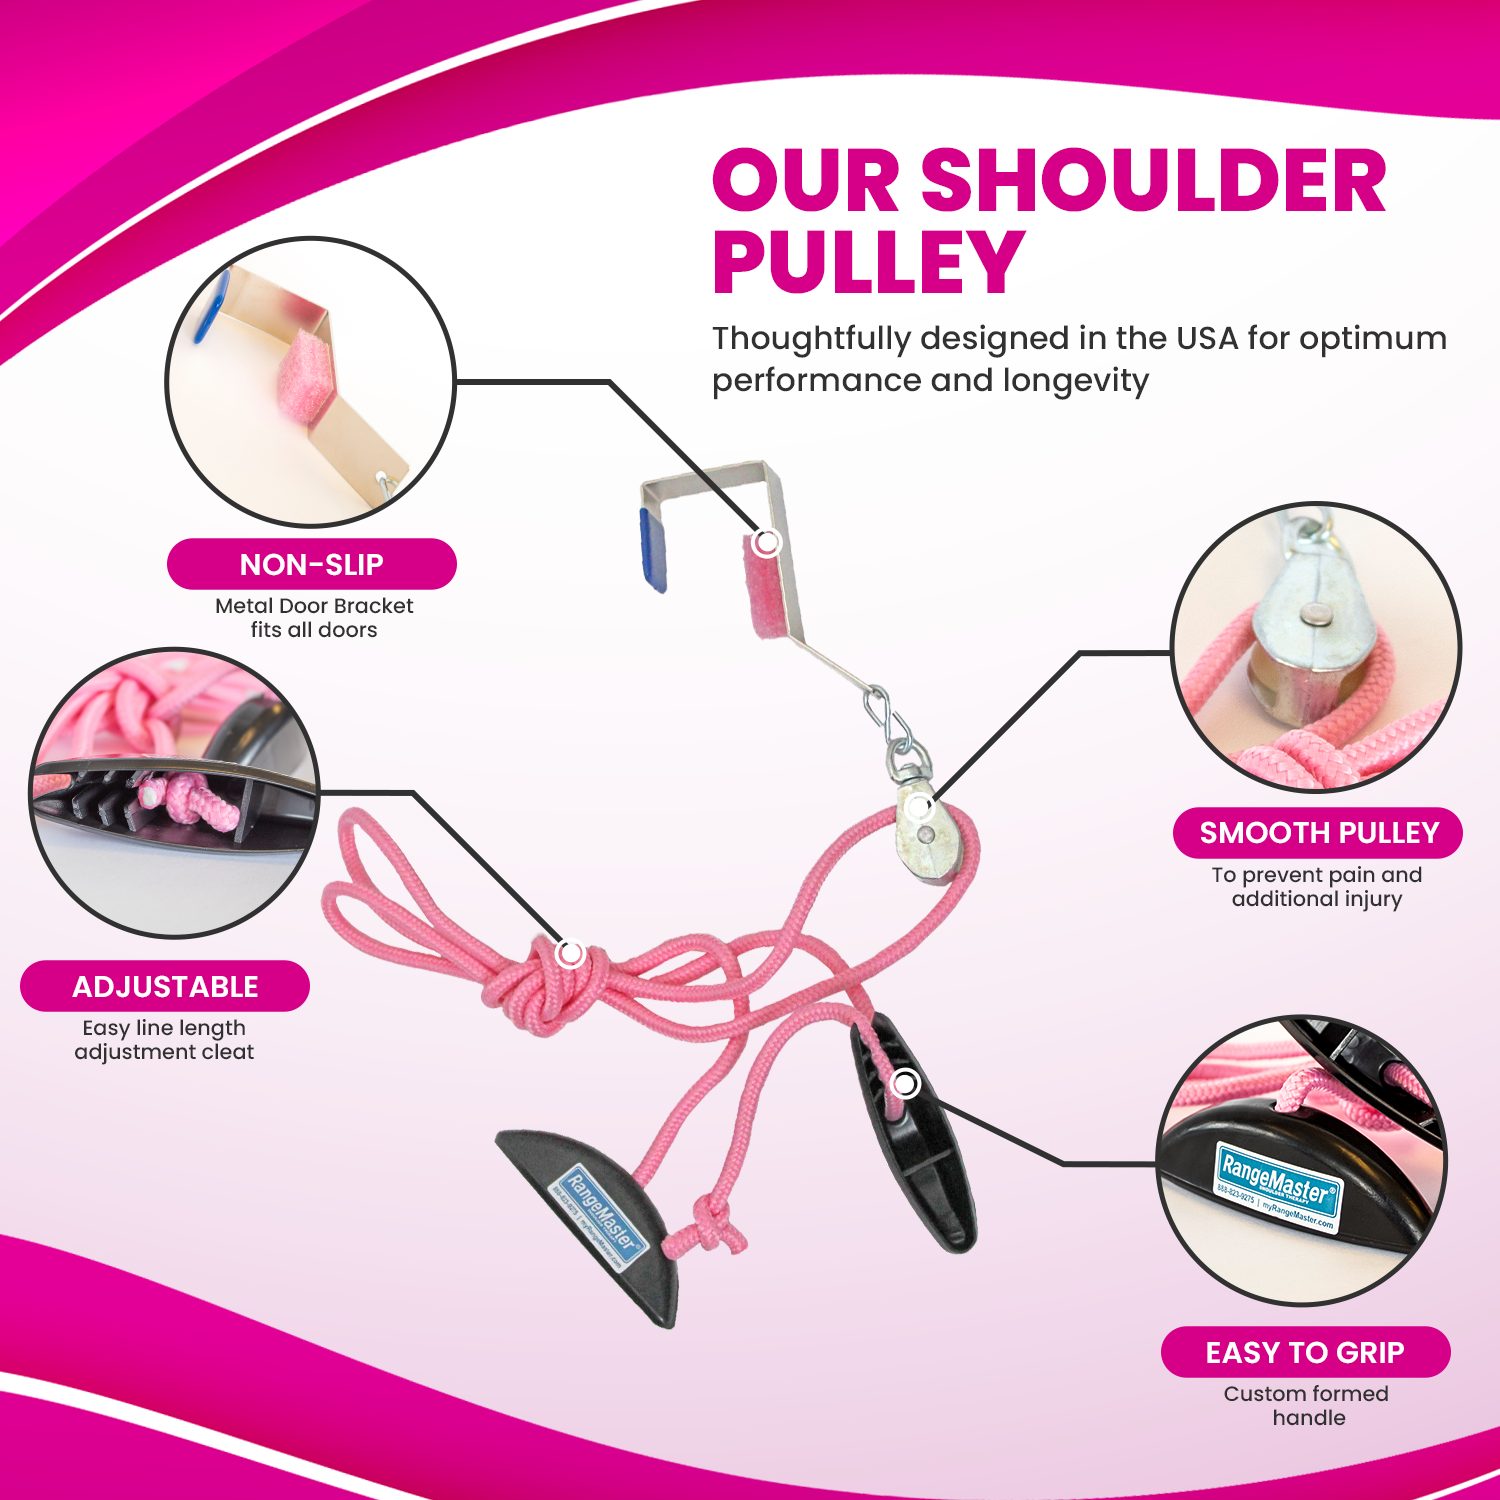 Slim Panda Shoulder Pulley for Physical Therapy, Over-The-Door Pulley  System for Increases Shoulder and Arm Range of Motion, Relieves Shoulder  Pain